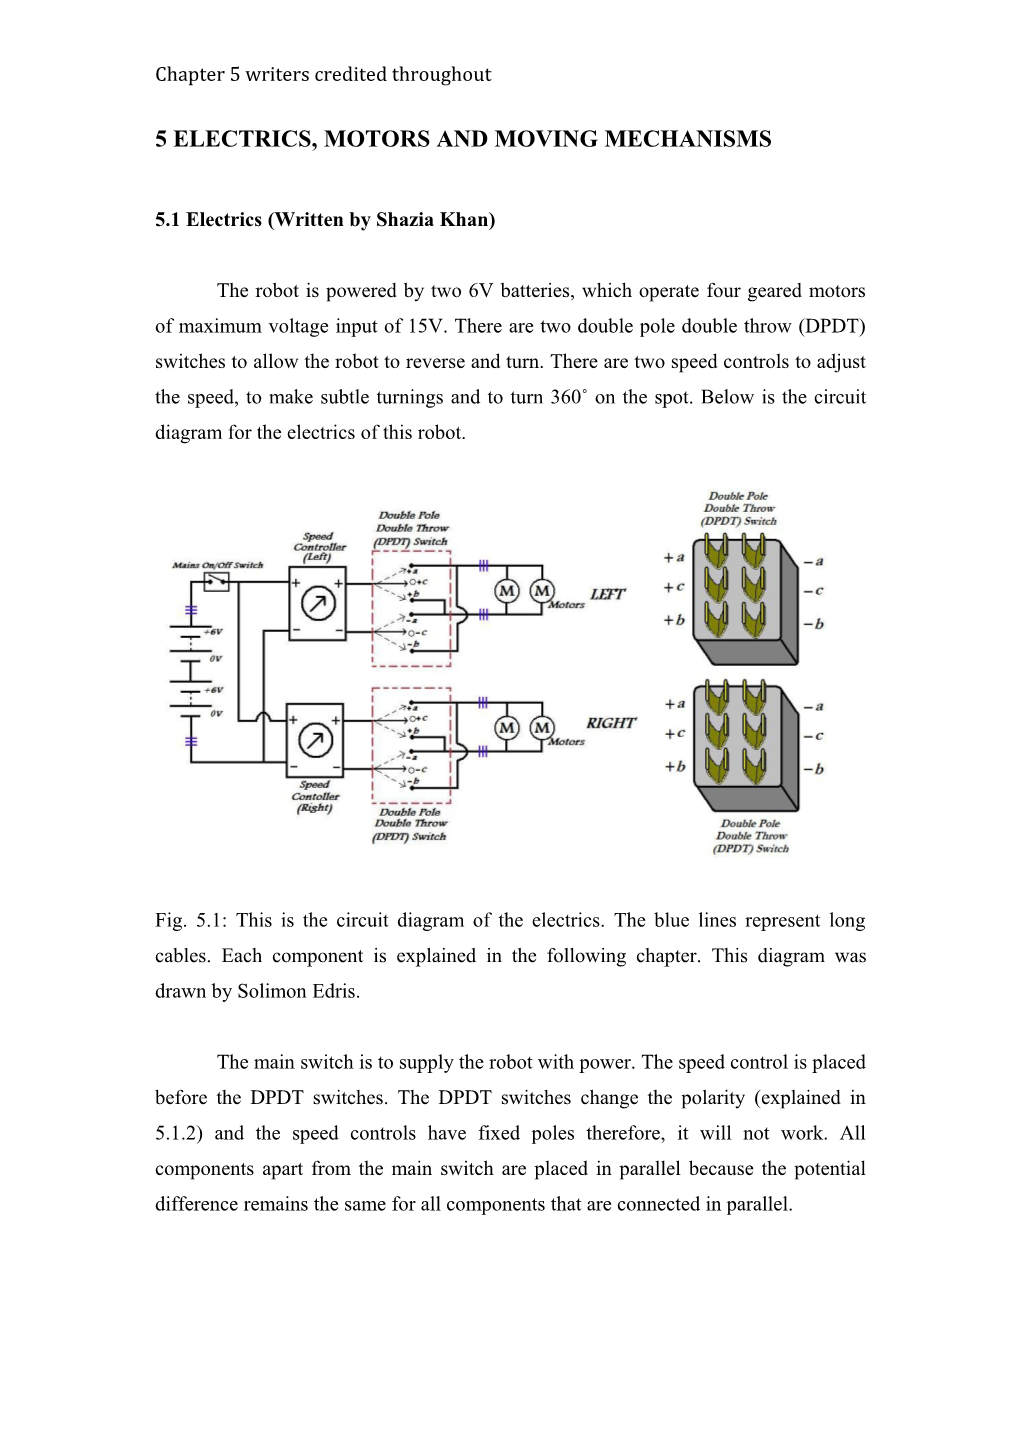 Chapter 5: Electrics, Motors, and Moving Mechanism